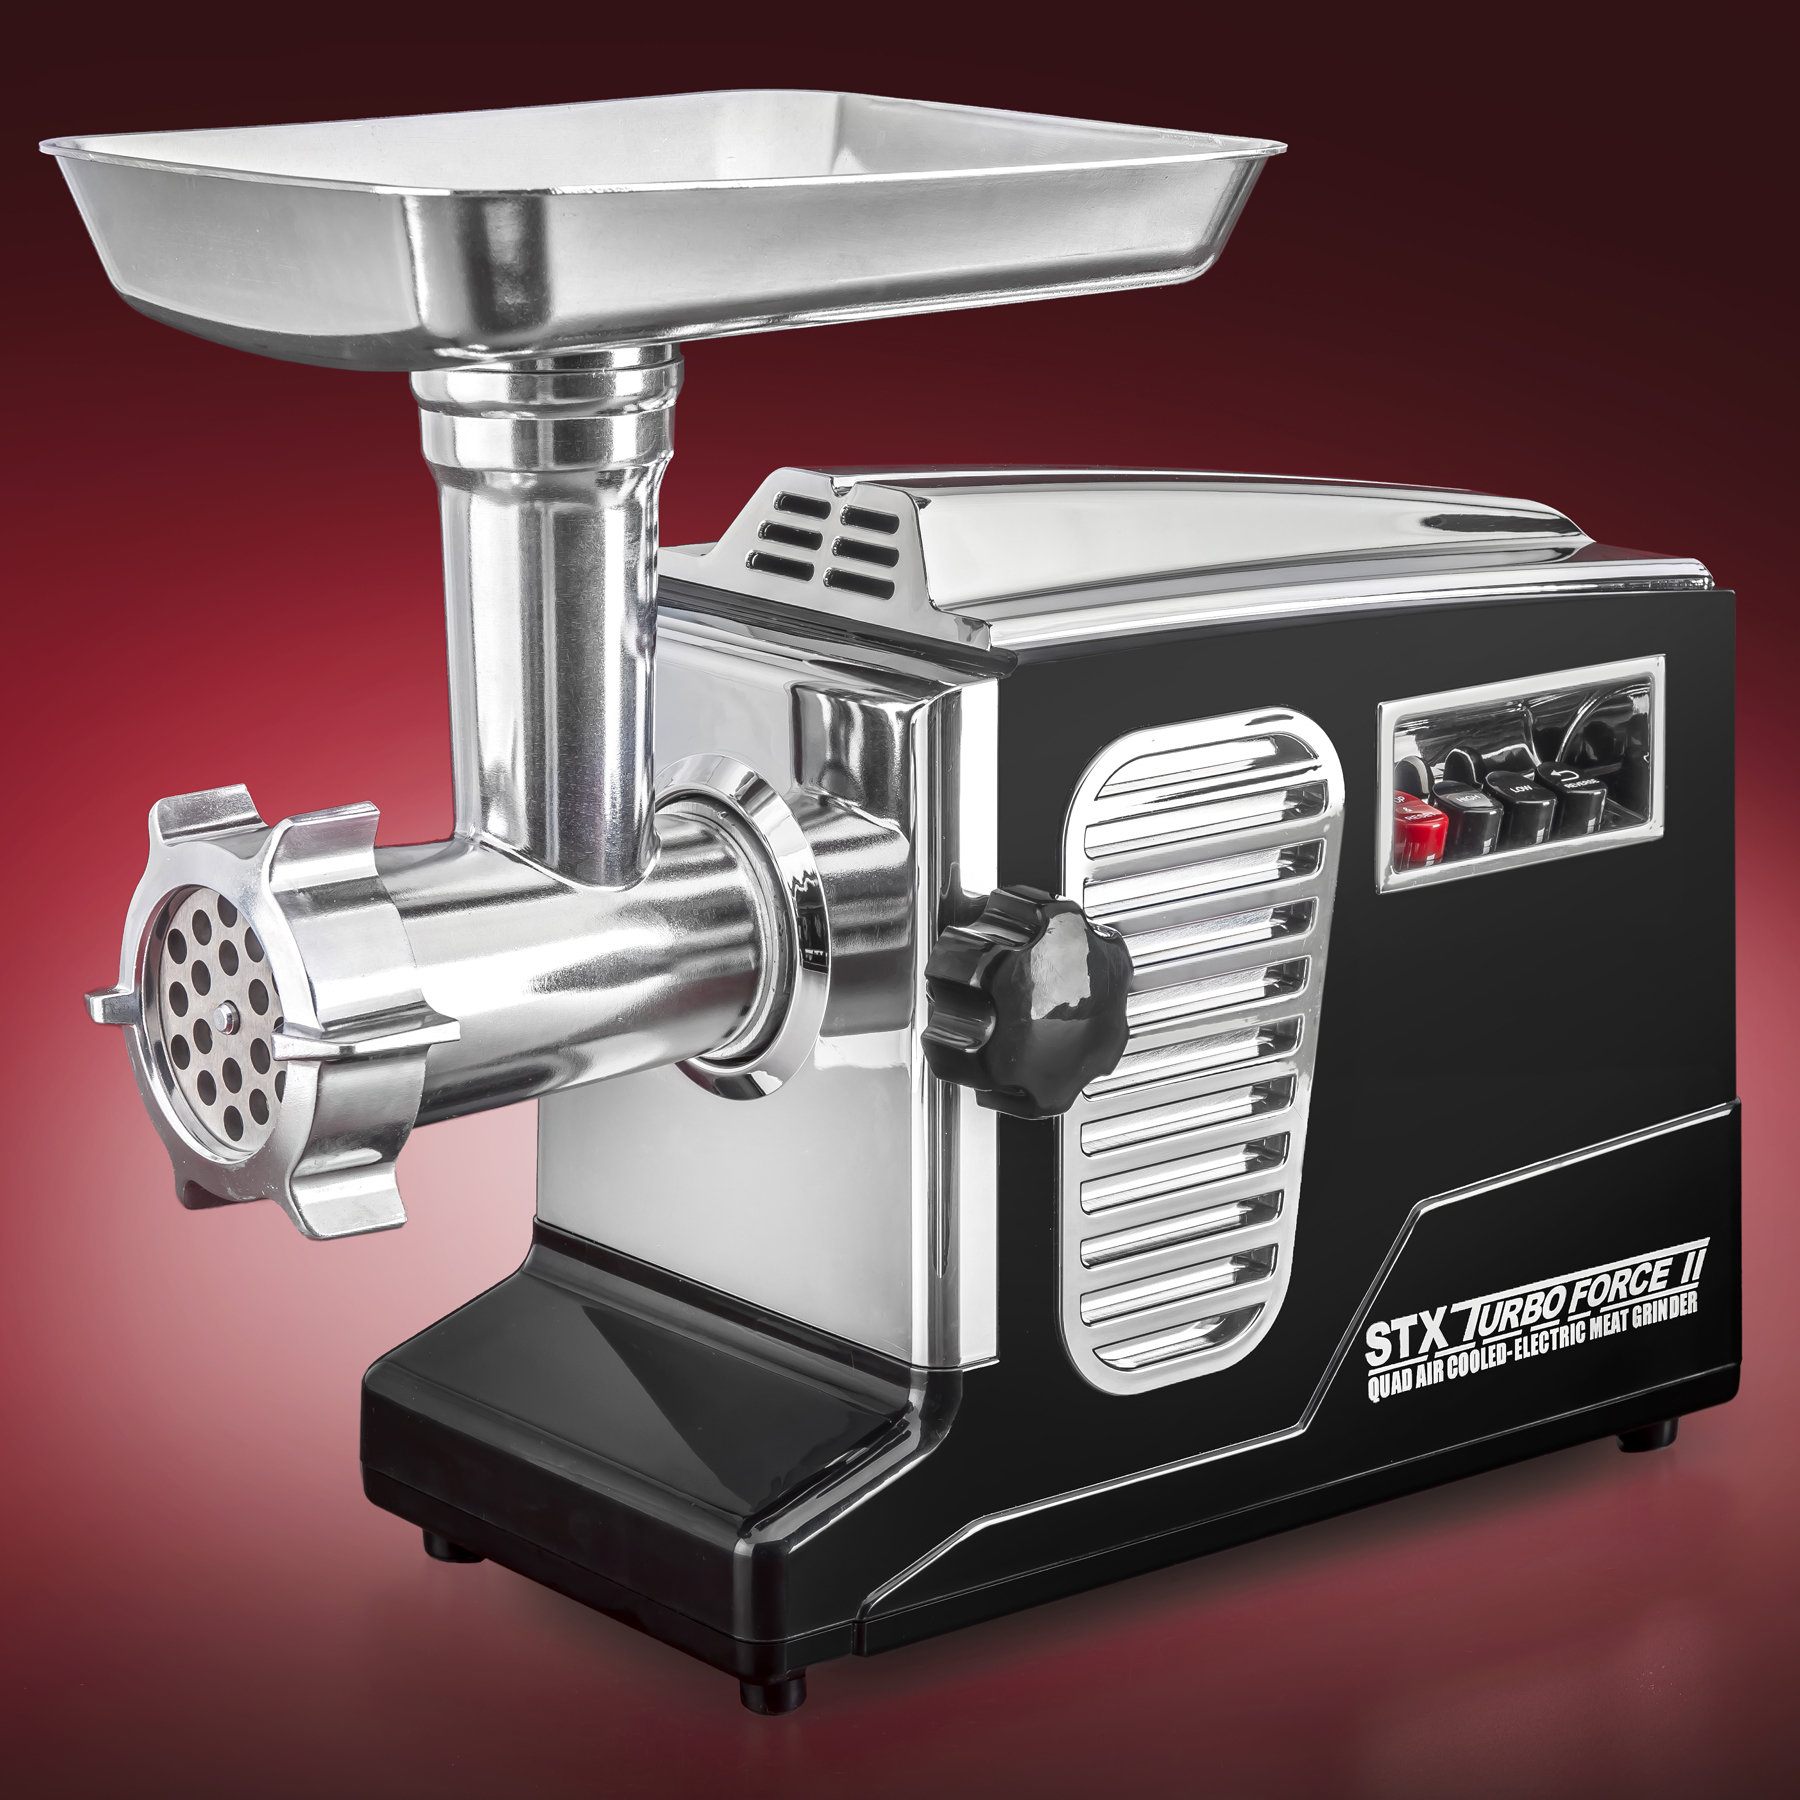 STX Turboforce II 4000 Series Electric Meat Grinder with Foot Pedal